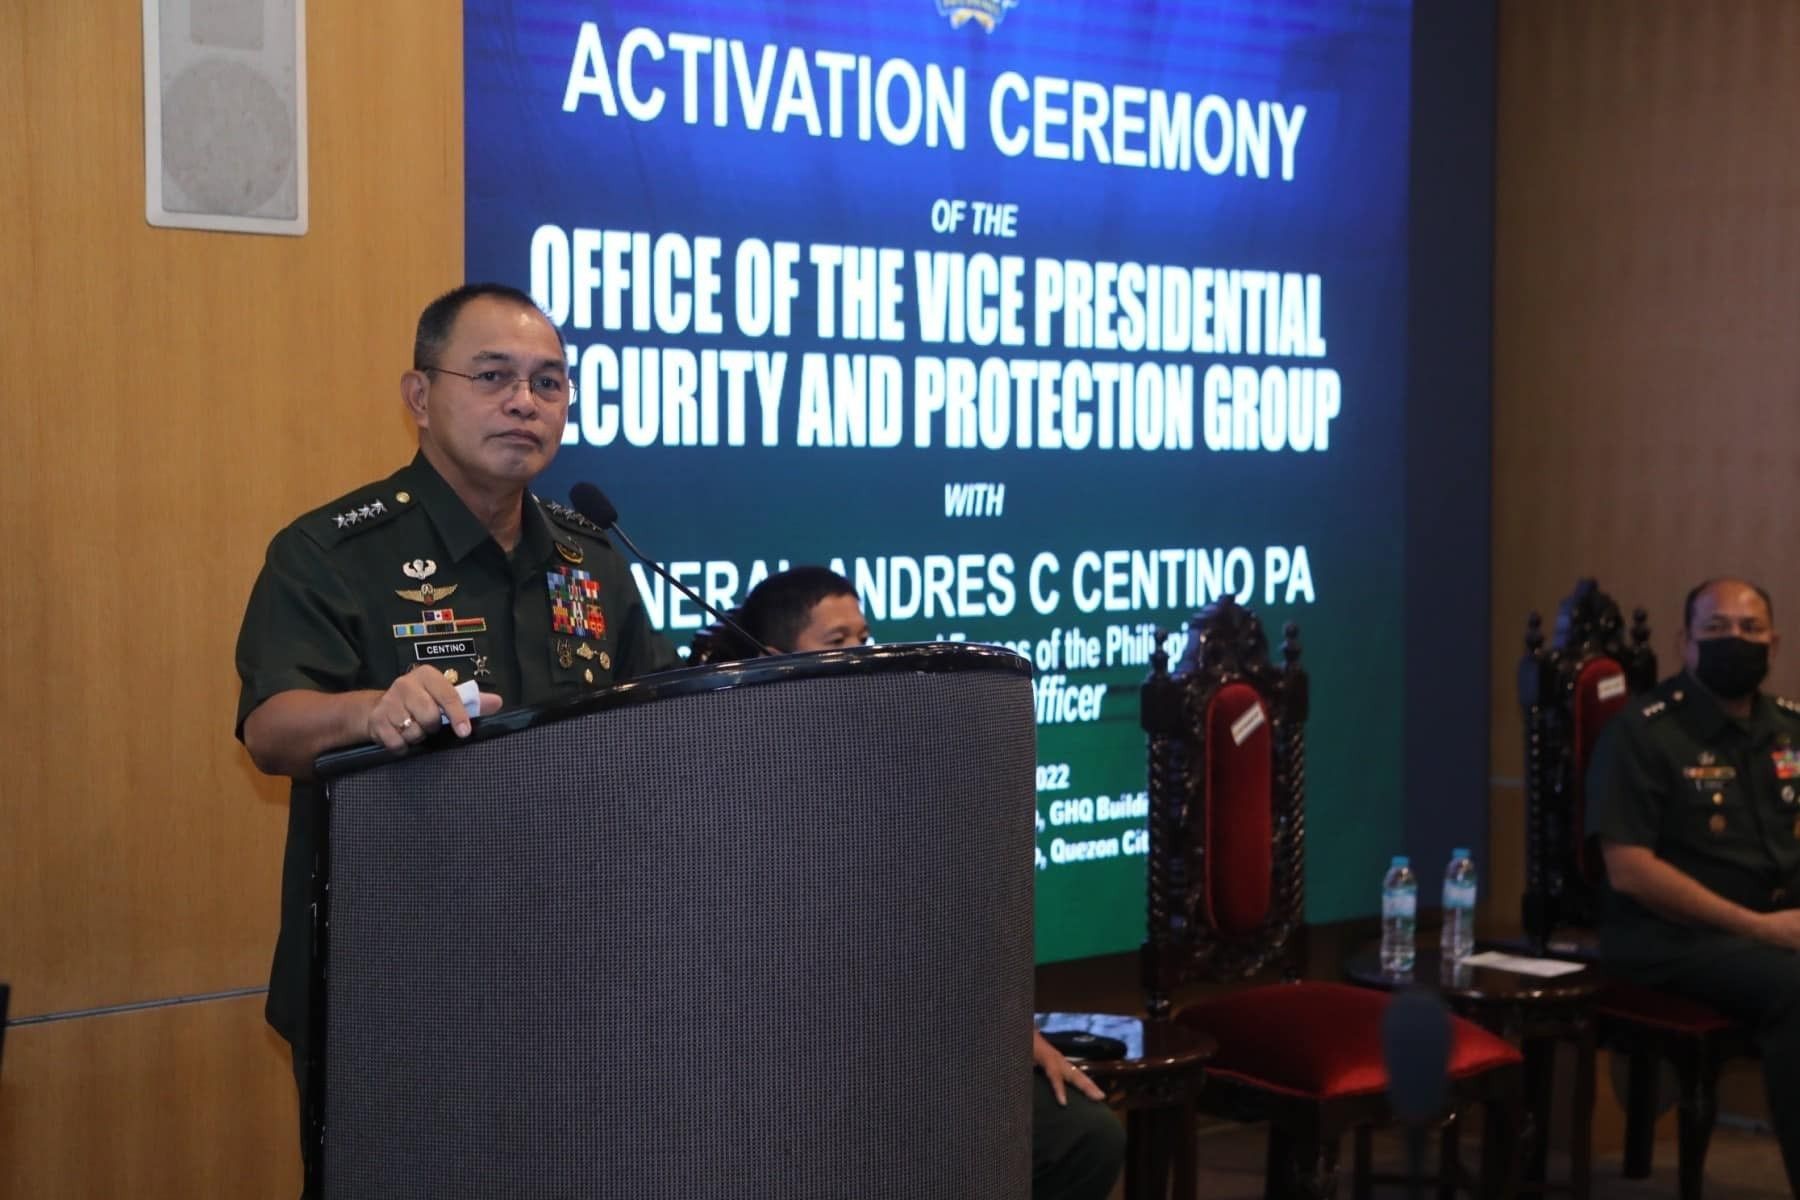 VP security group not new, just renamed â�� AFP